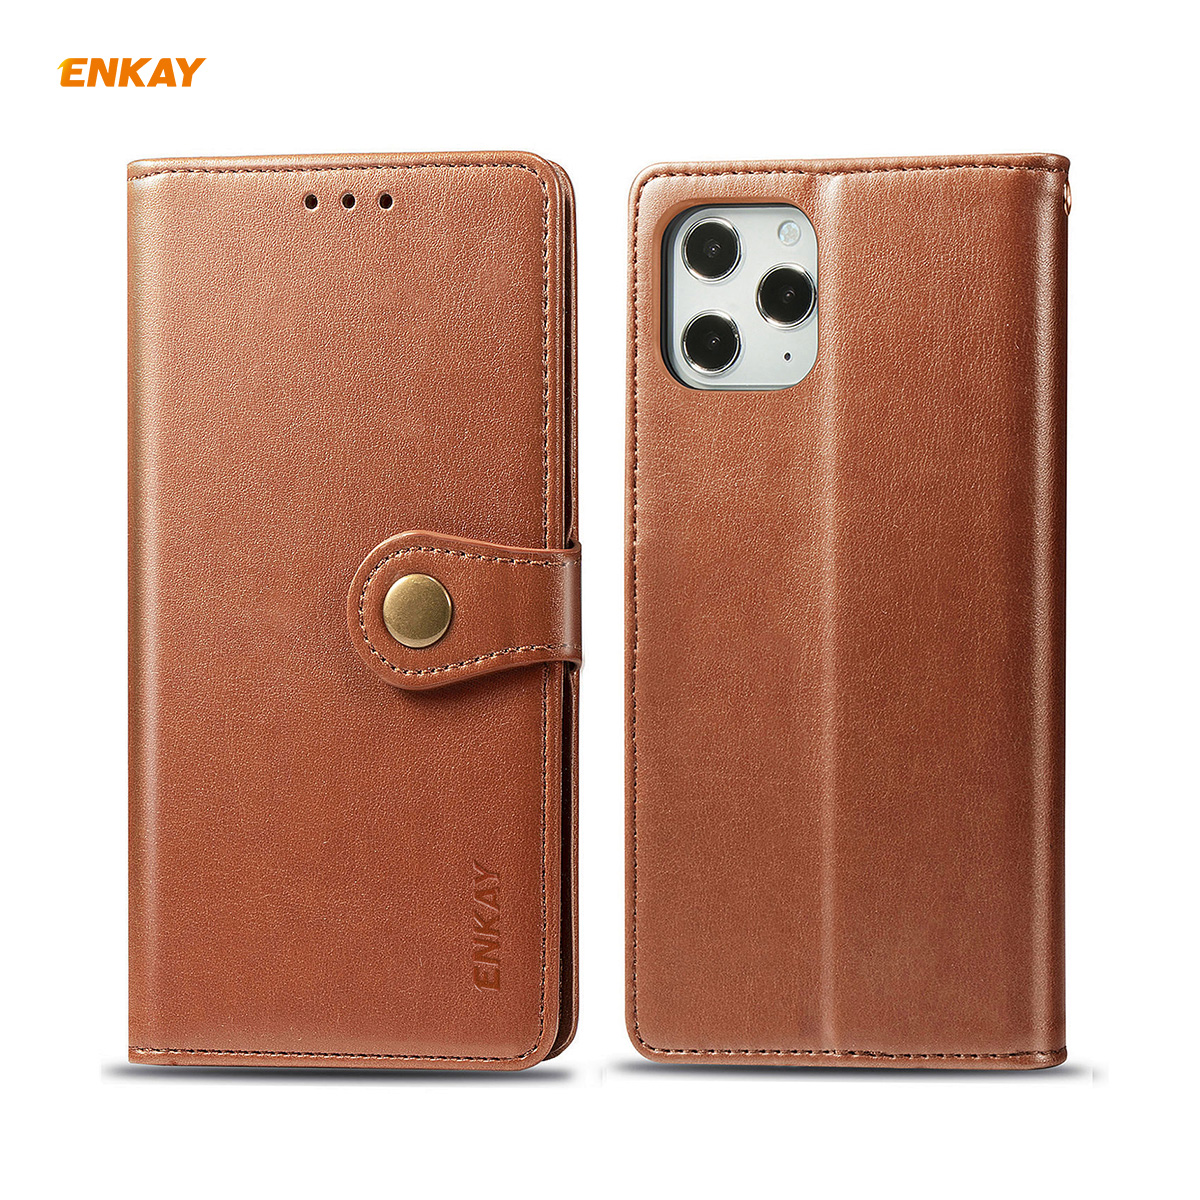 Enkay-for-iPhone-12-Pro-Max-Case-Retro-Litchi-Pattern-Flip-with-Mutiple-Card-Slots-Wallet-Stand-PU-L-1755116-14